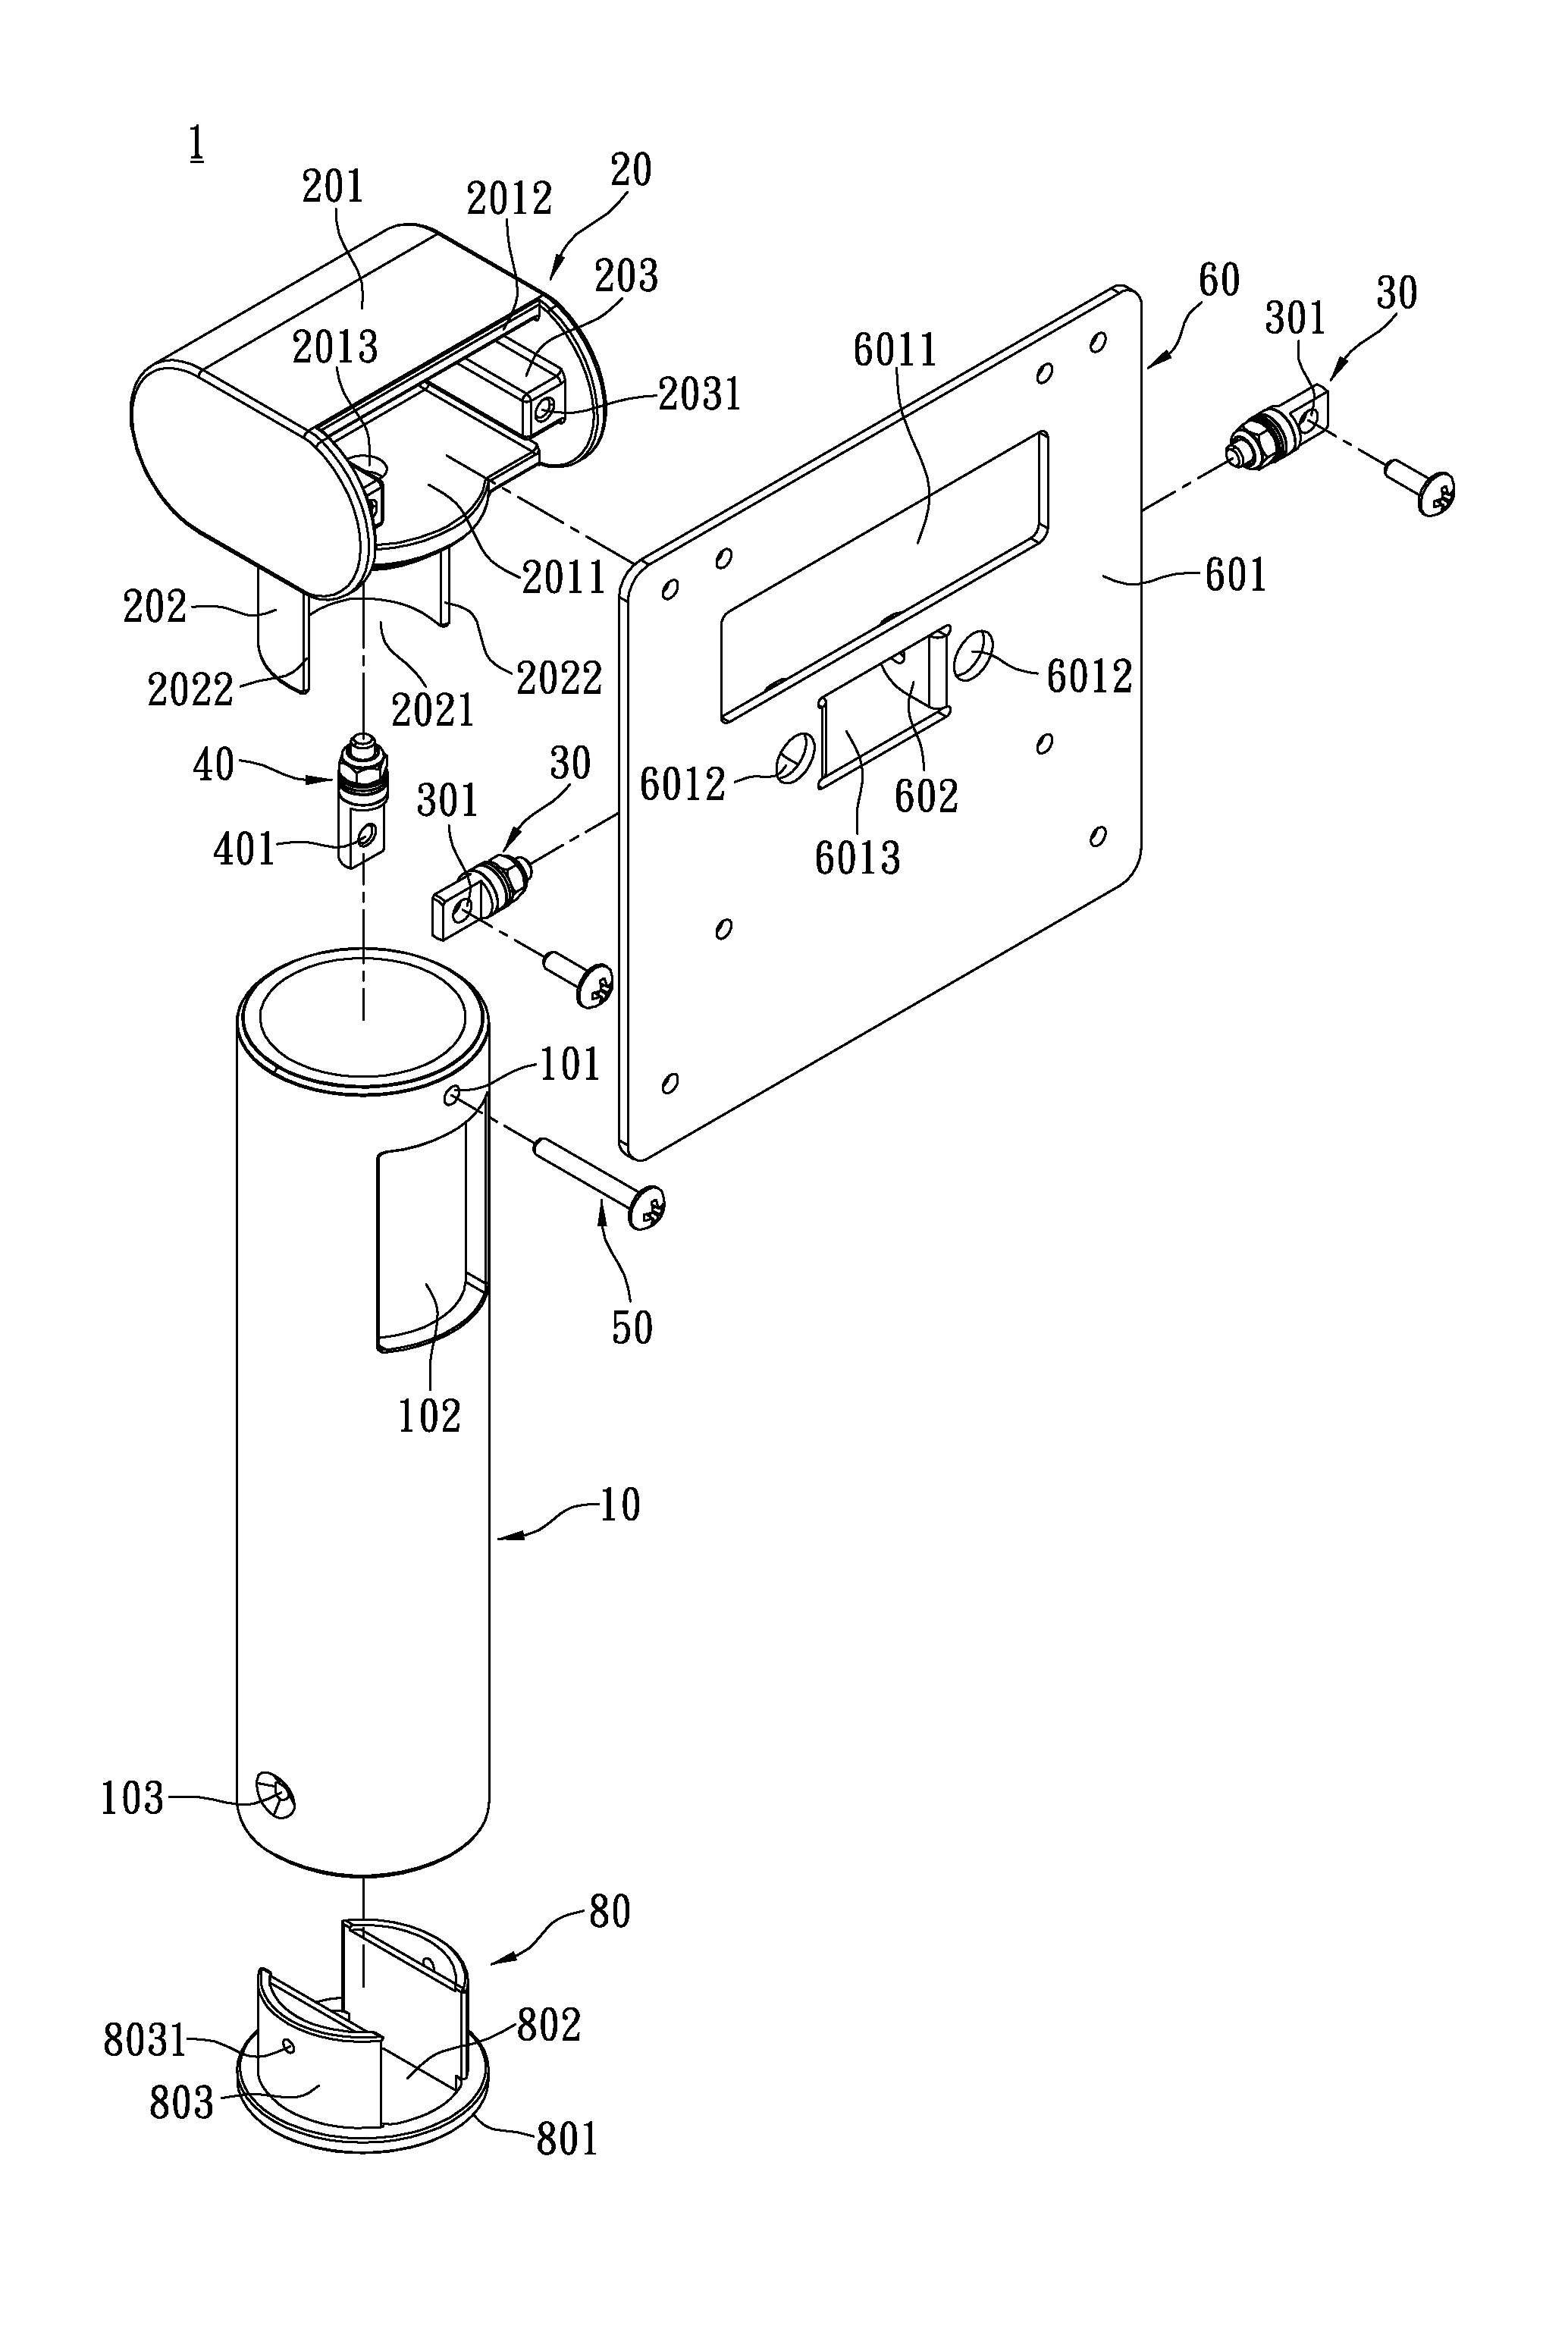 Display supporting device